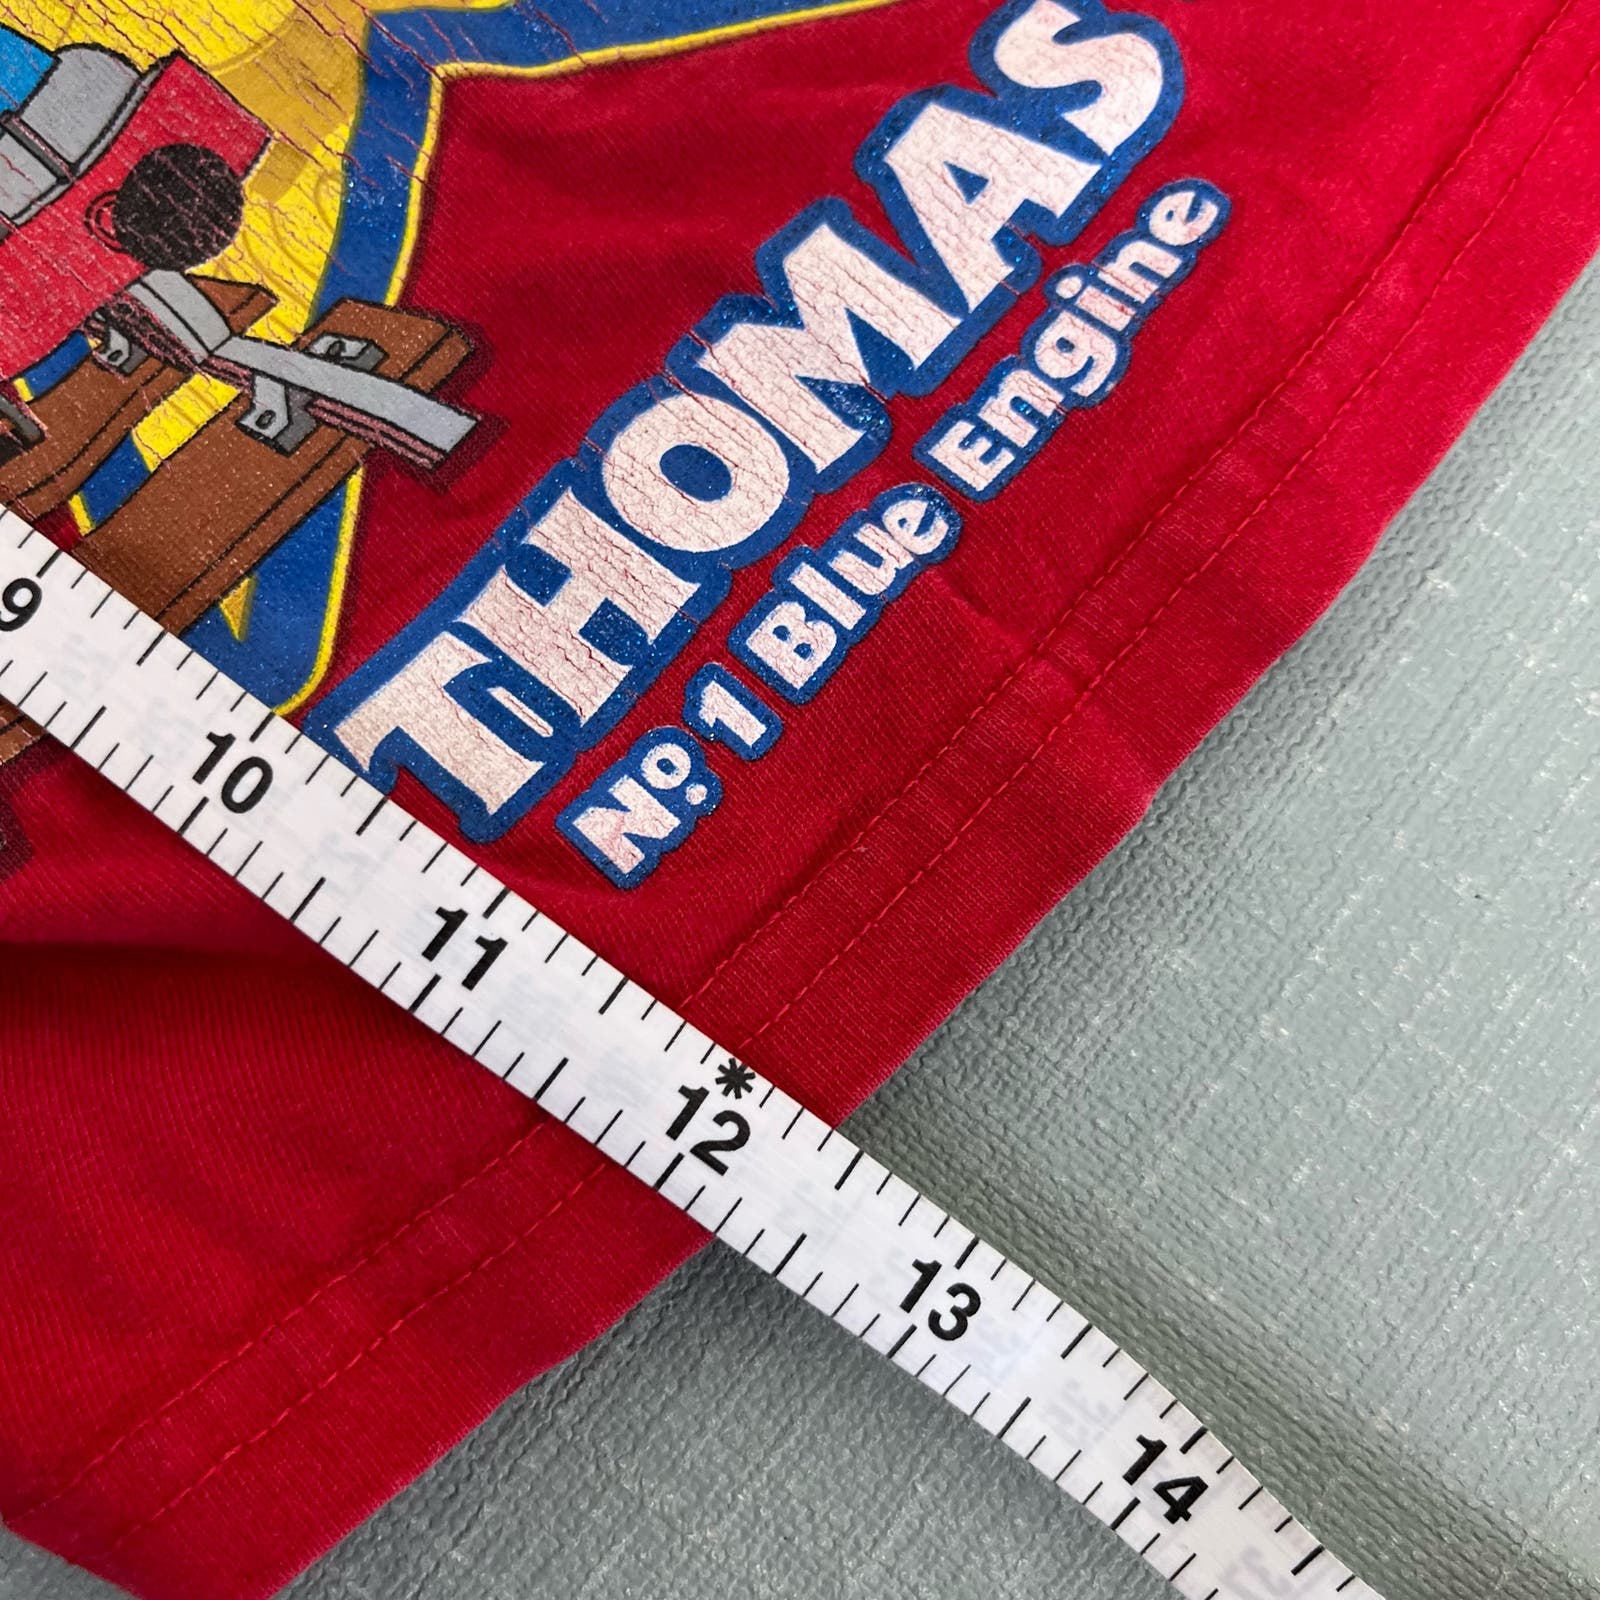 Vintage Thomas and Friends Long Sleeve Tee 2T